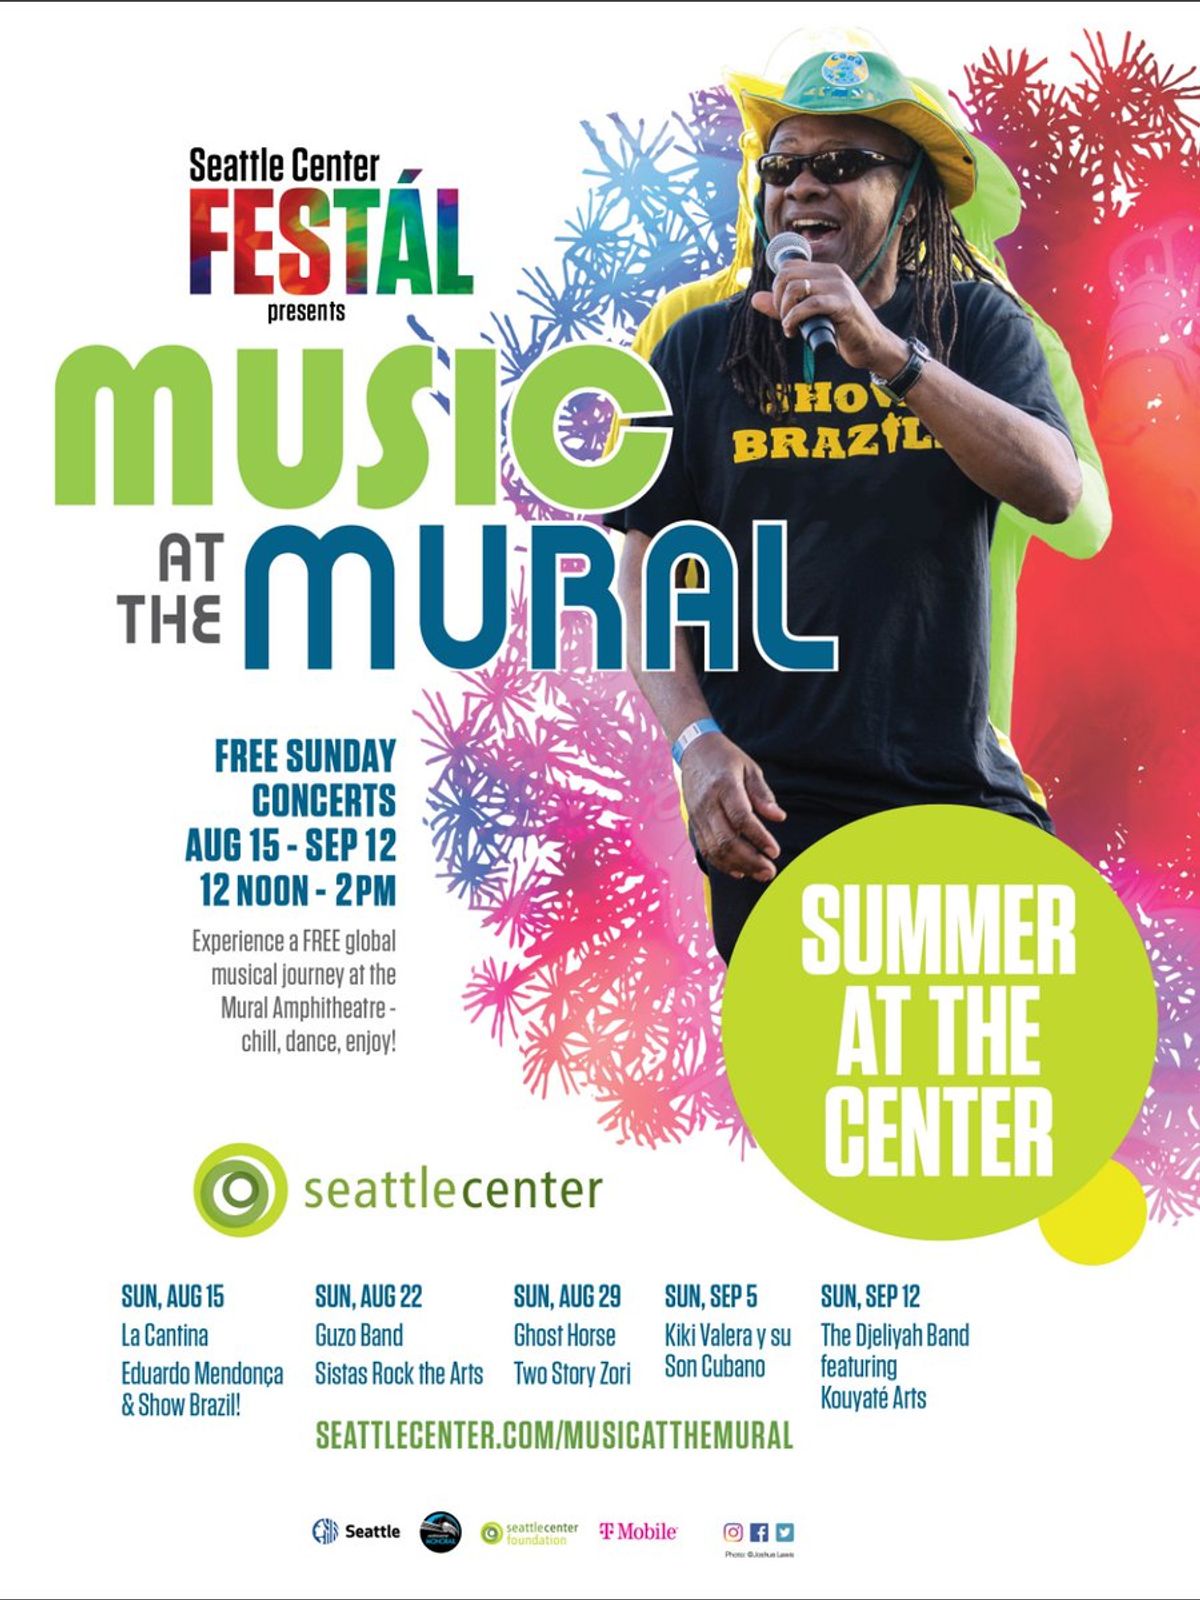 Seattle Center Festál presents Music at the Mural at Mural Amphitheatre